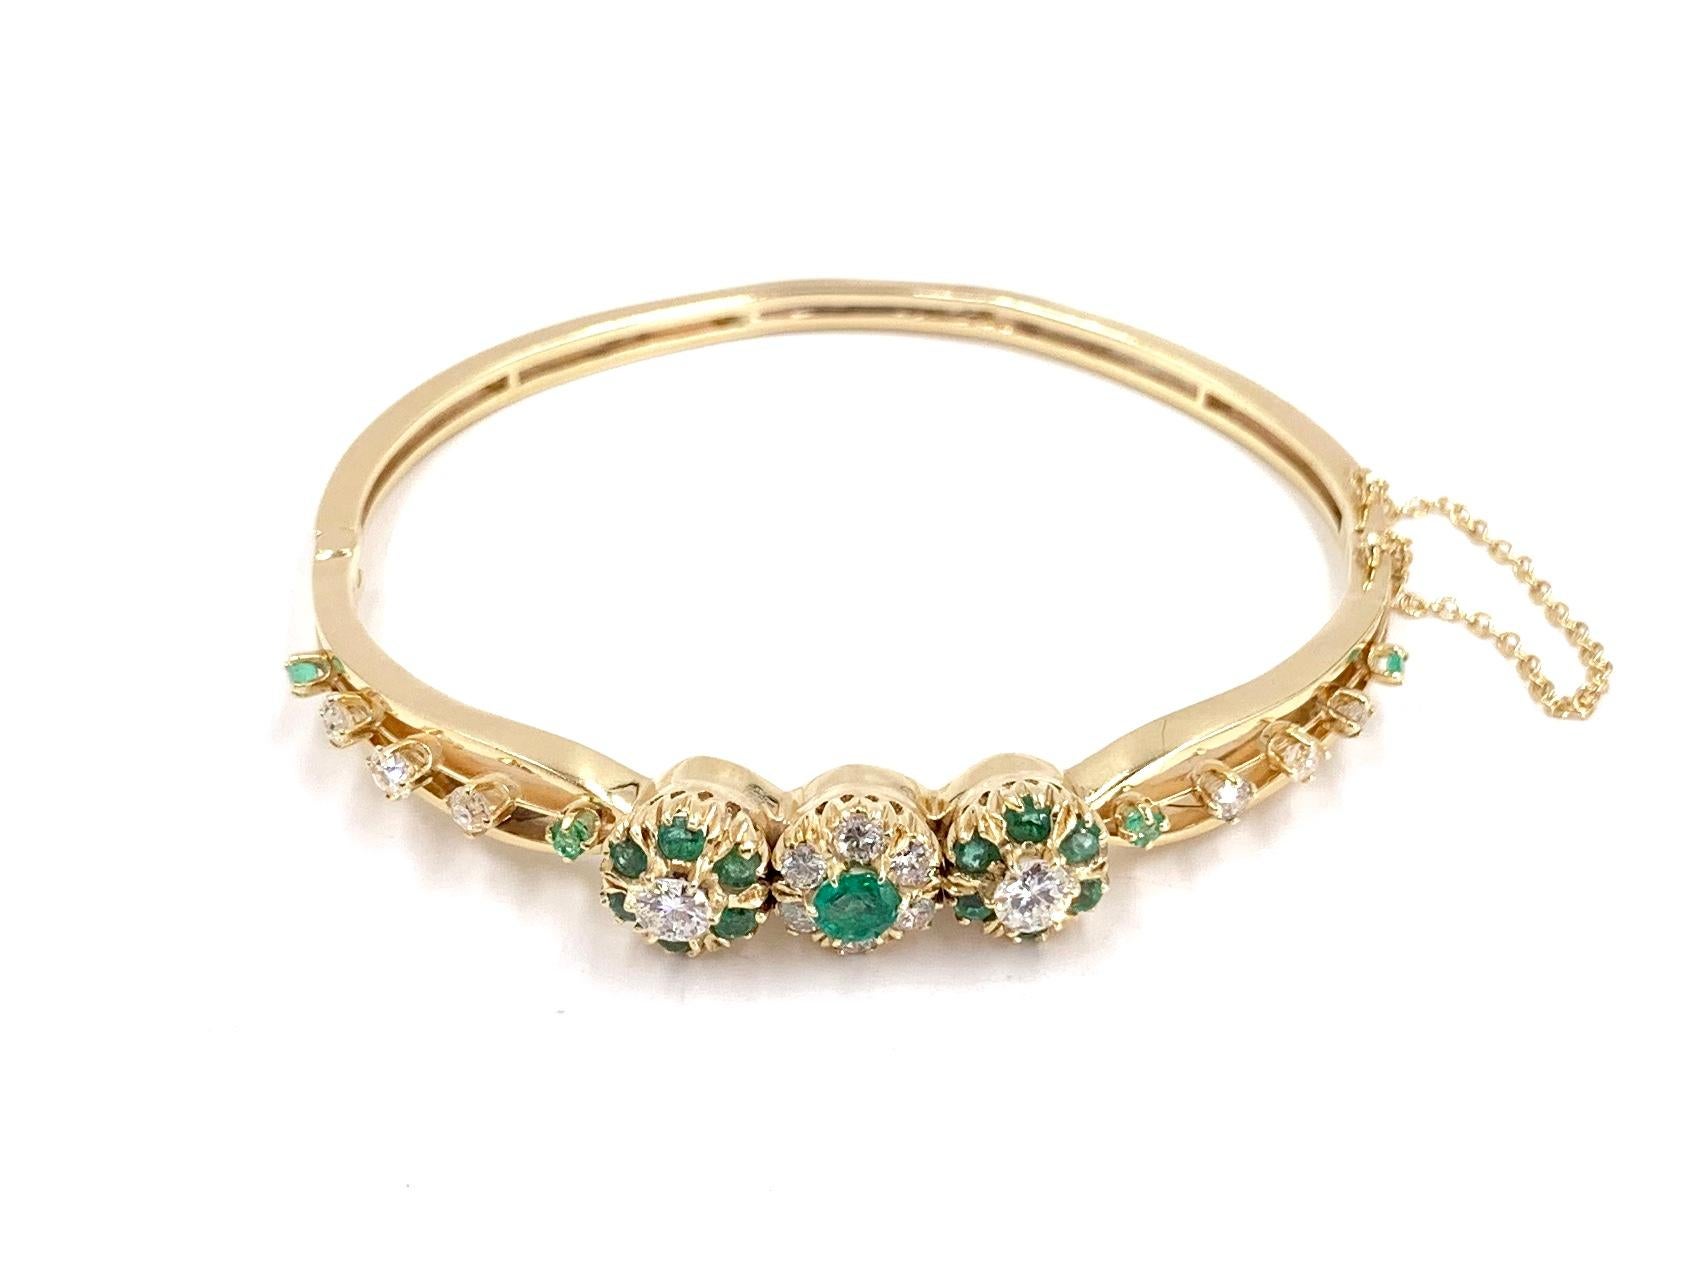 An elegant 14 karat yellow gold hinged bangle bracelet featuring approximately .75 carats of white diamonds and .70 vibrant emeralds. Diamonds and emeralds are arranged in a beautiful floral motif in center. Bracelet crafted circa 1960 however the